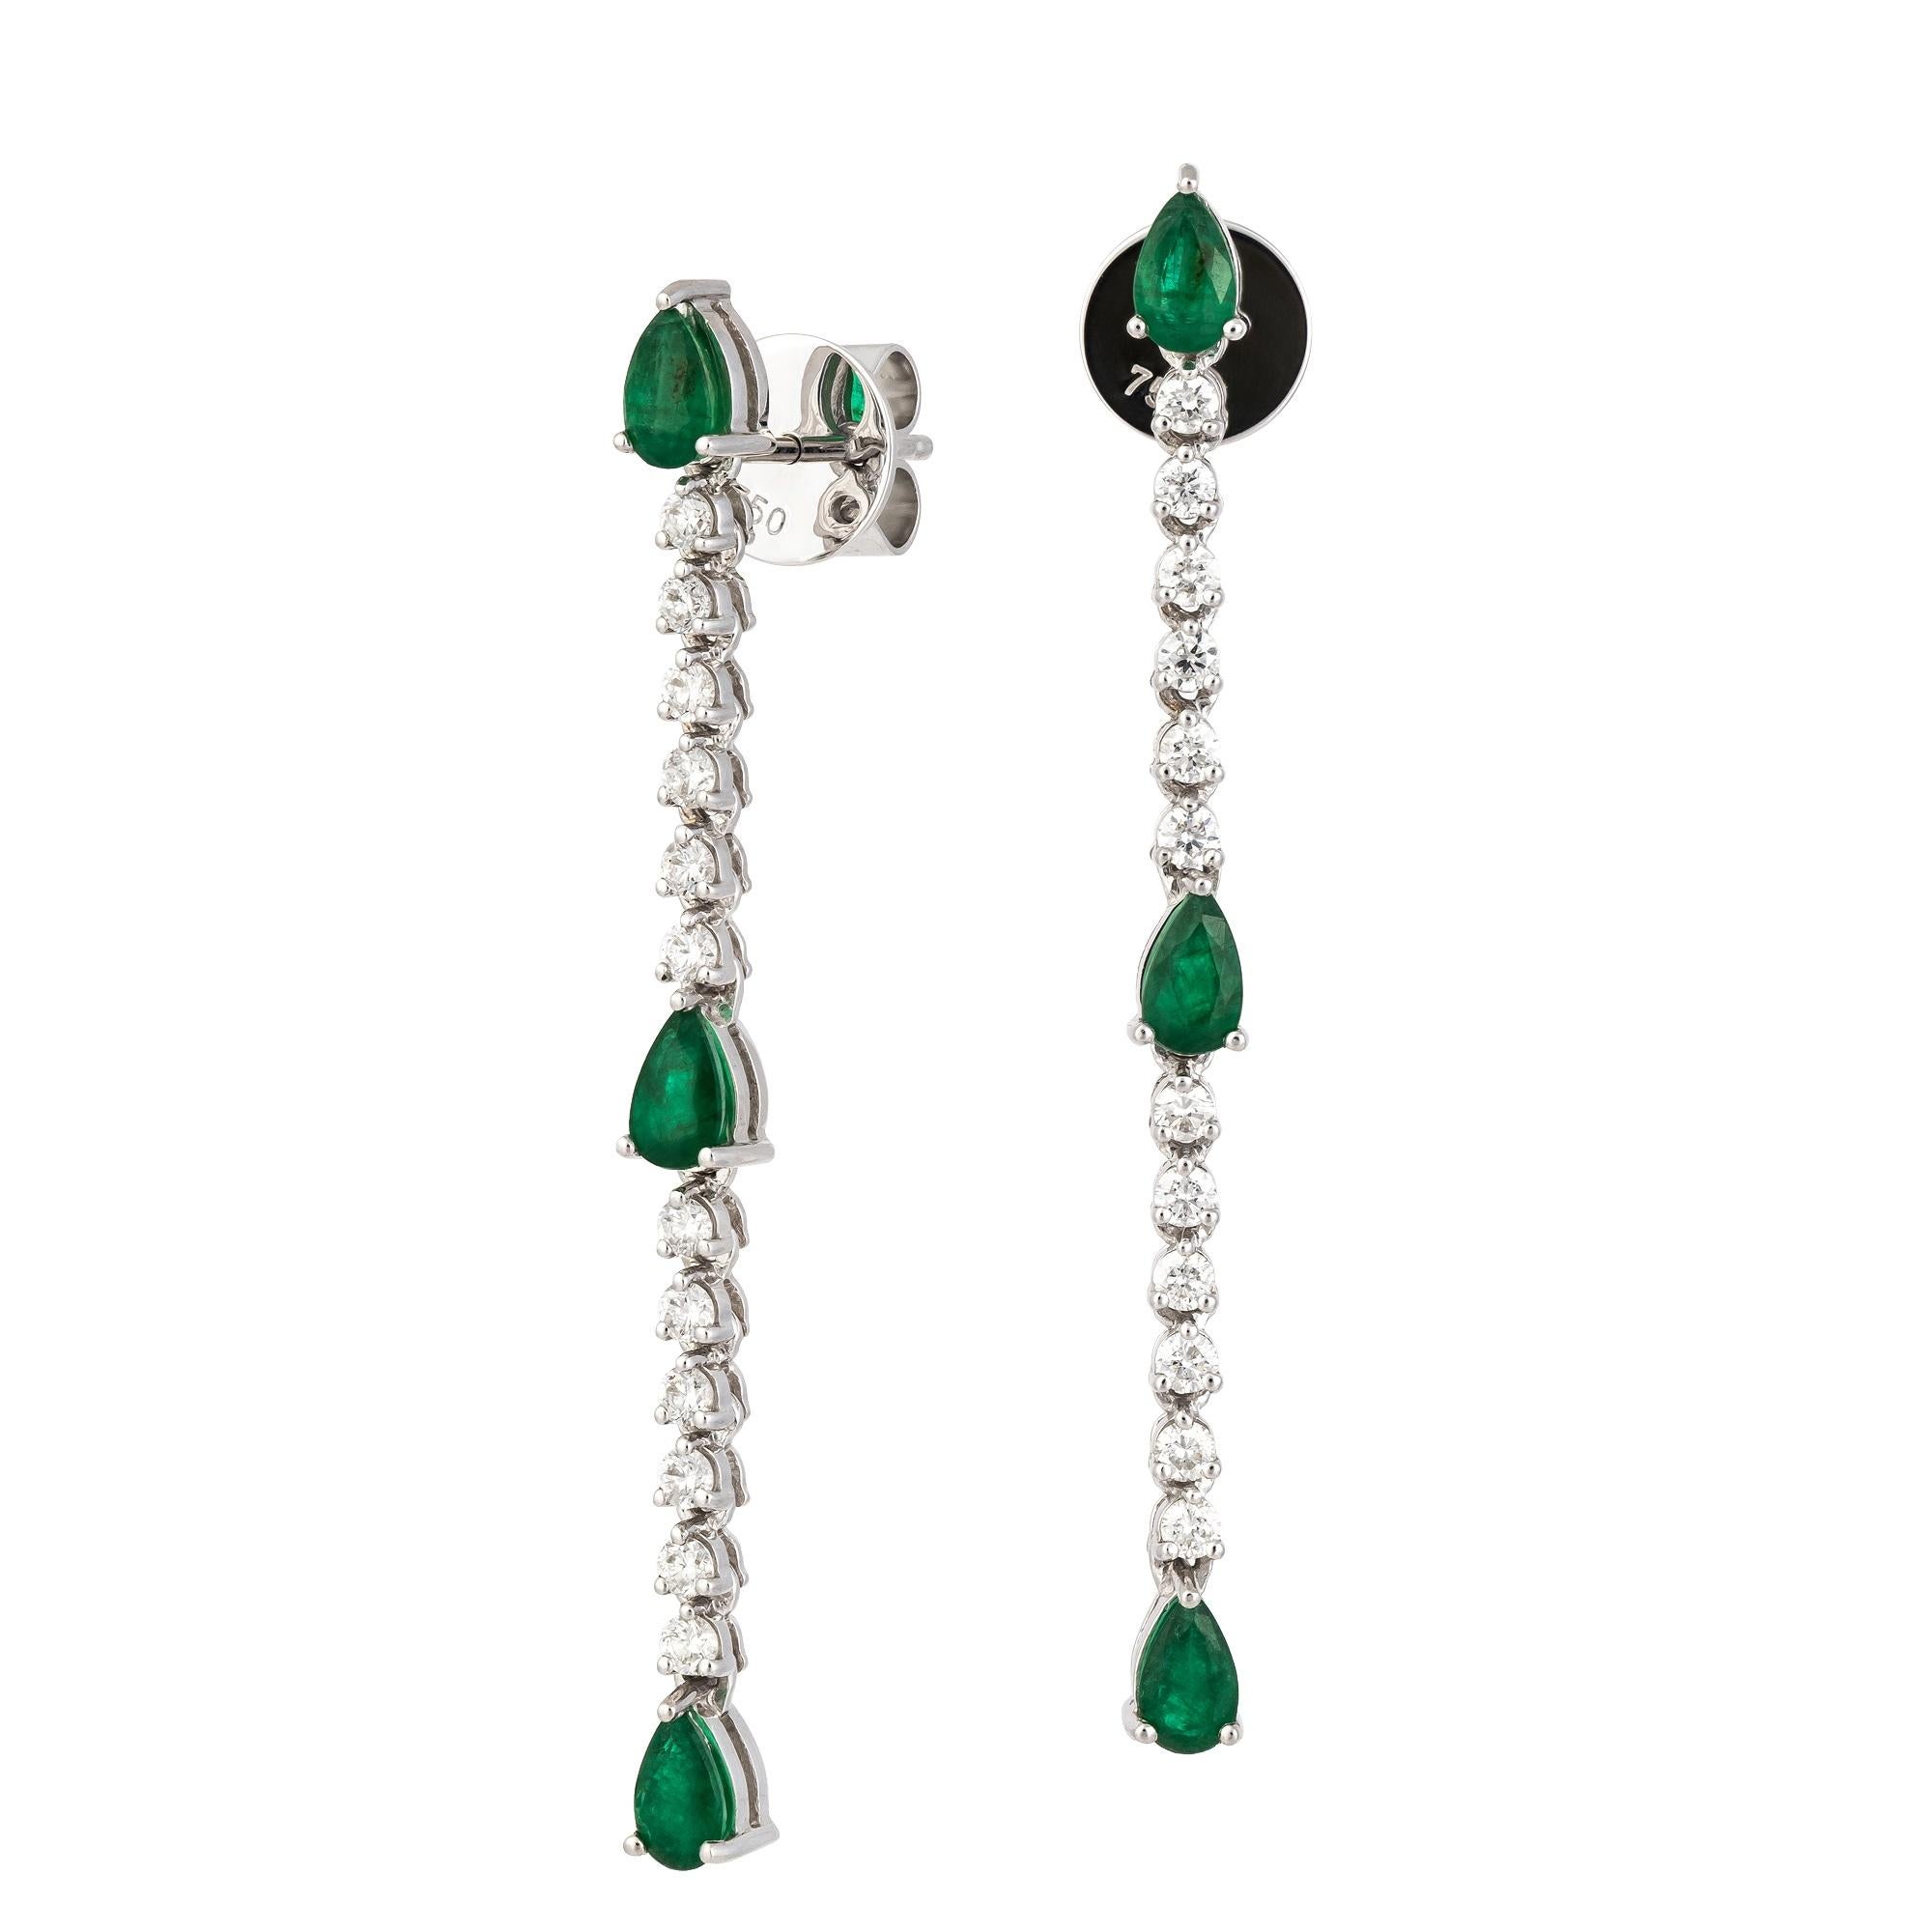 Earrings White 18K Gold 

Diamond 0.63 Cts/24 Pcs
Emerald 1.22 Cts/6 Pcs

Weight 3,90 grams 

It is our honour to create fine jewelry, and it’s for that reason that we choose to only work with high-quality, enduring materials that can almost